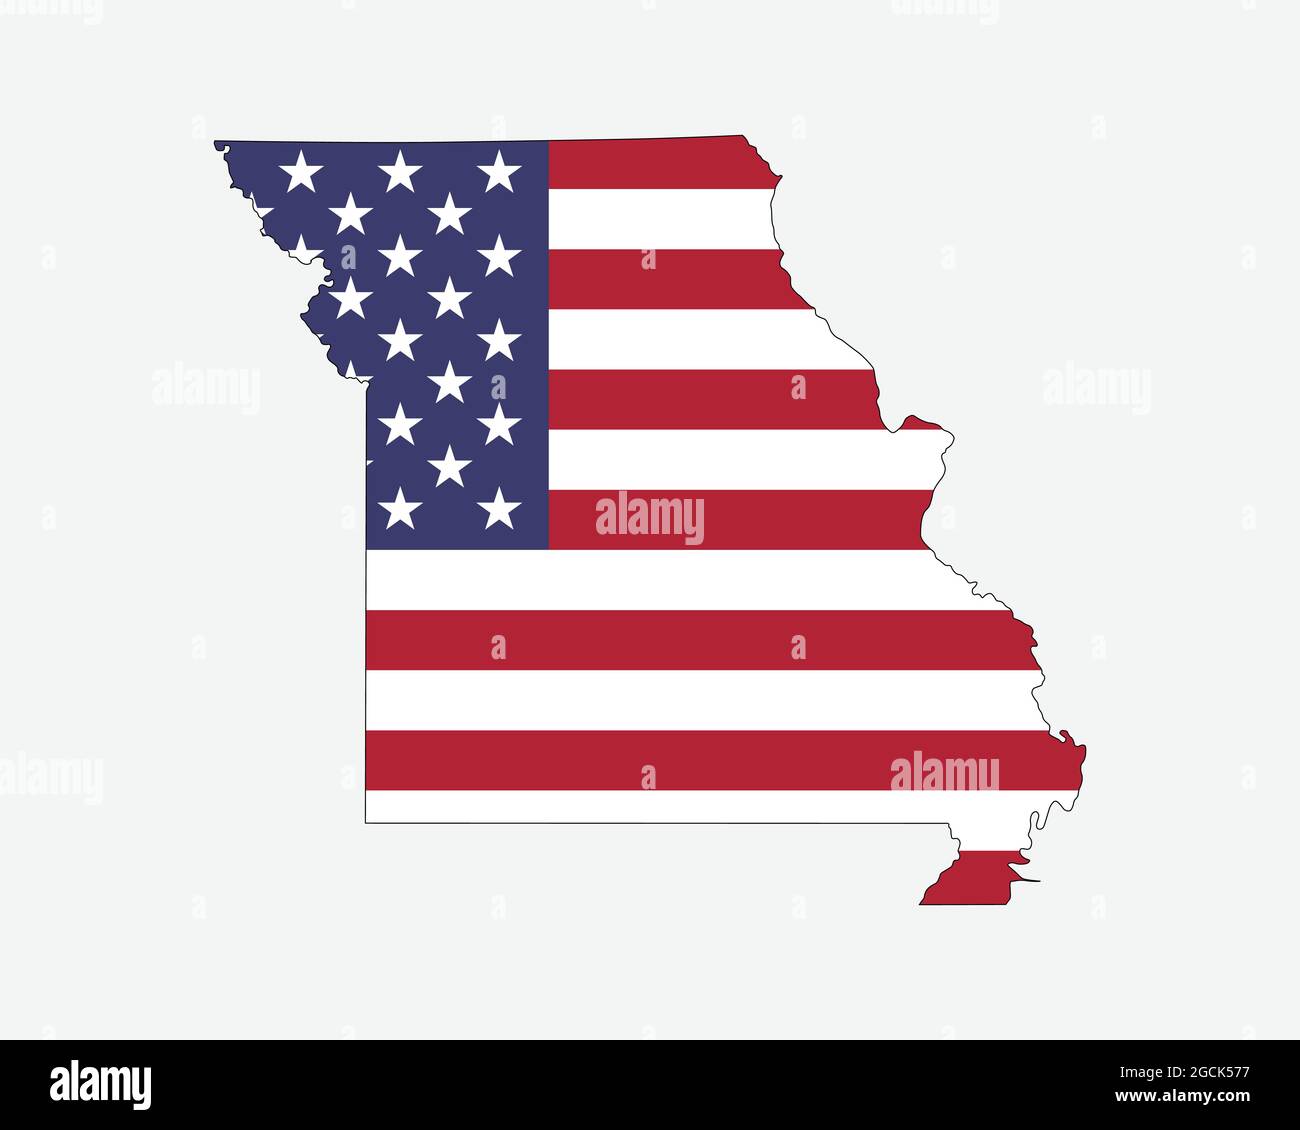 Missouri Map on American Flag. MO, USA State Map on US Flag. EPS Vector Graphic Clipart Icon Stock Vector